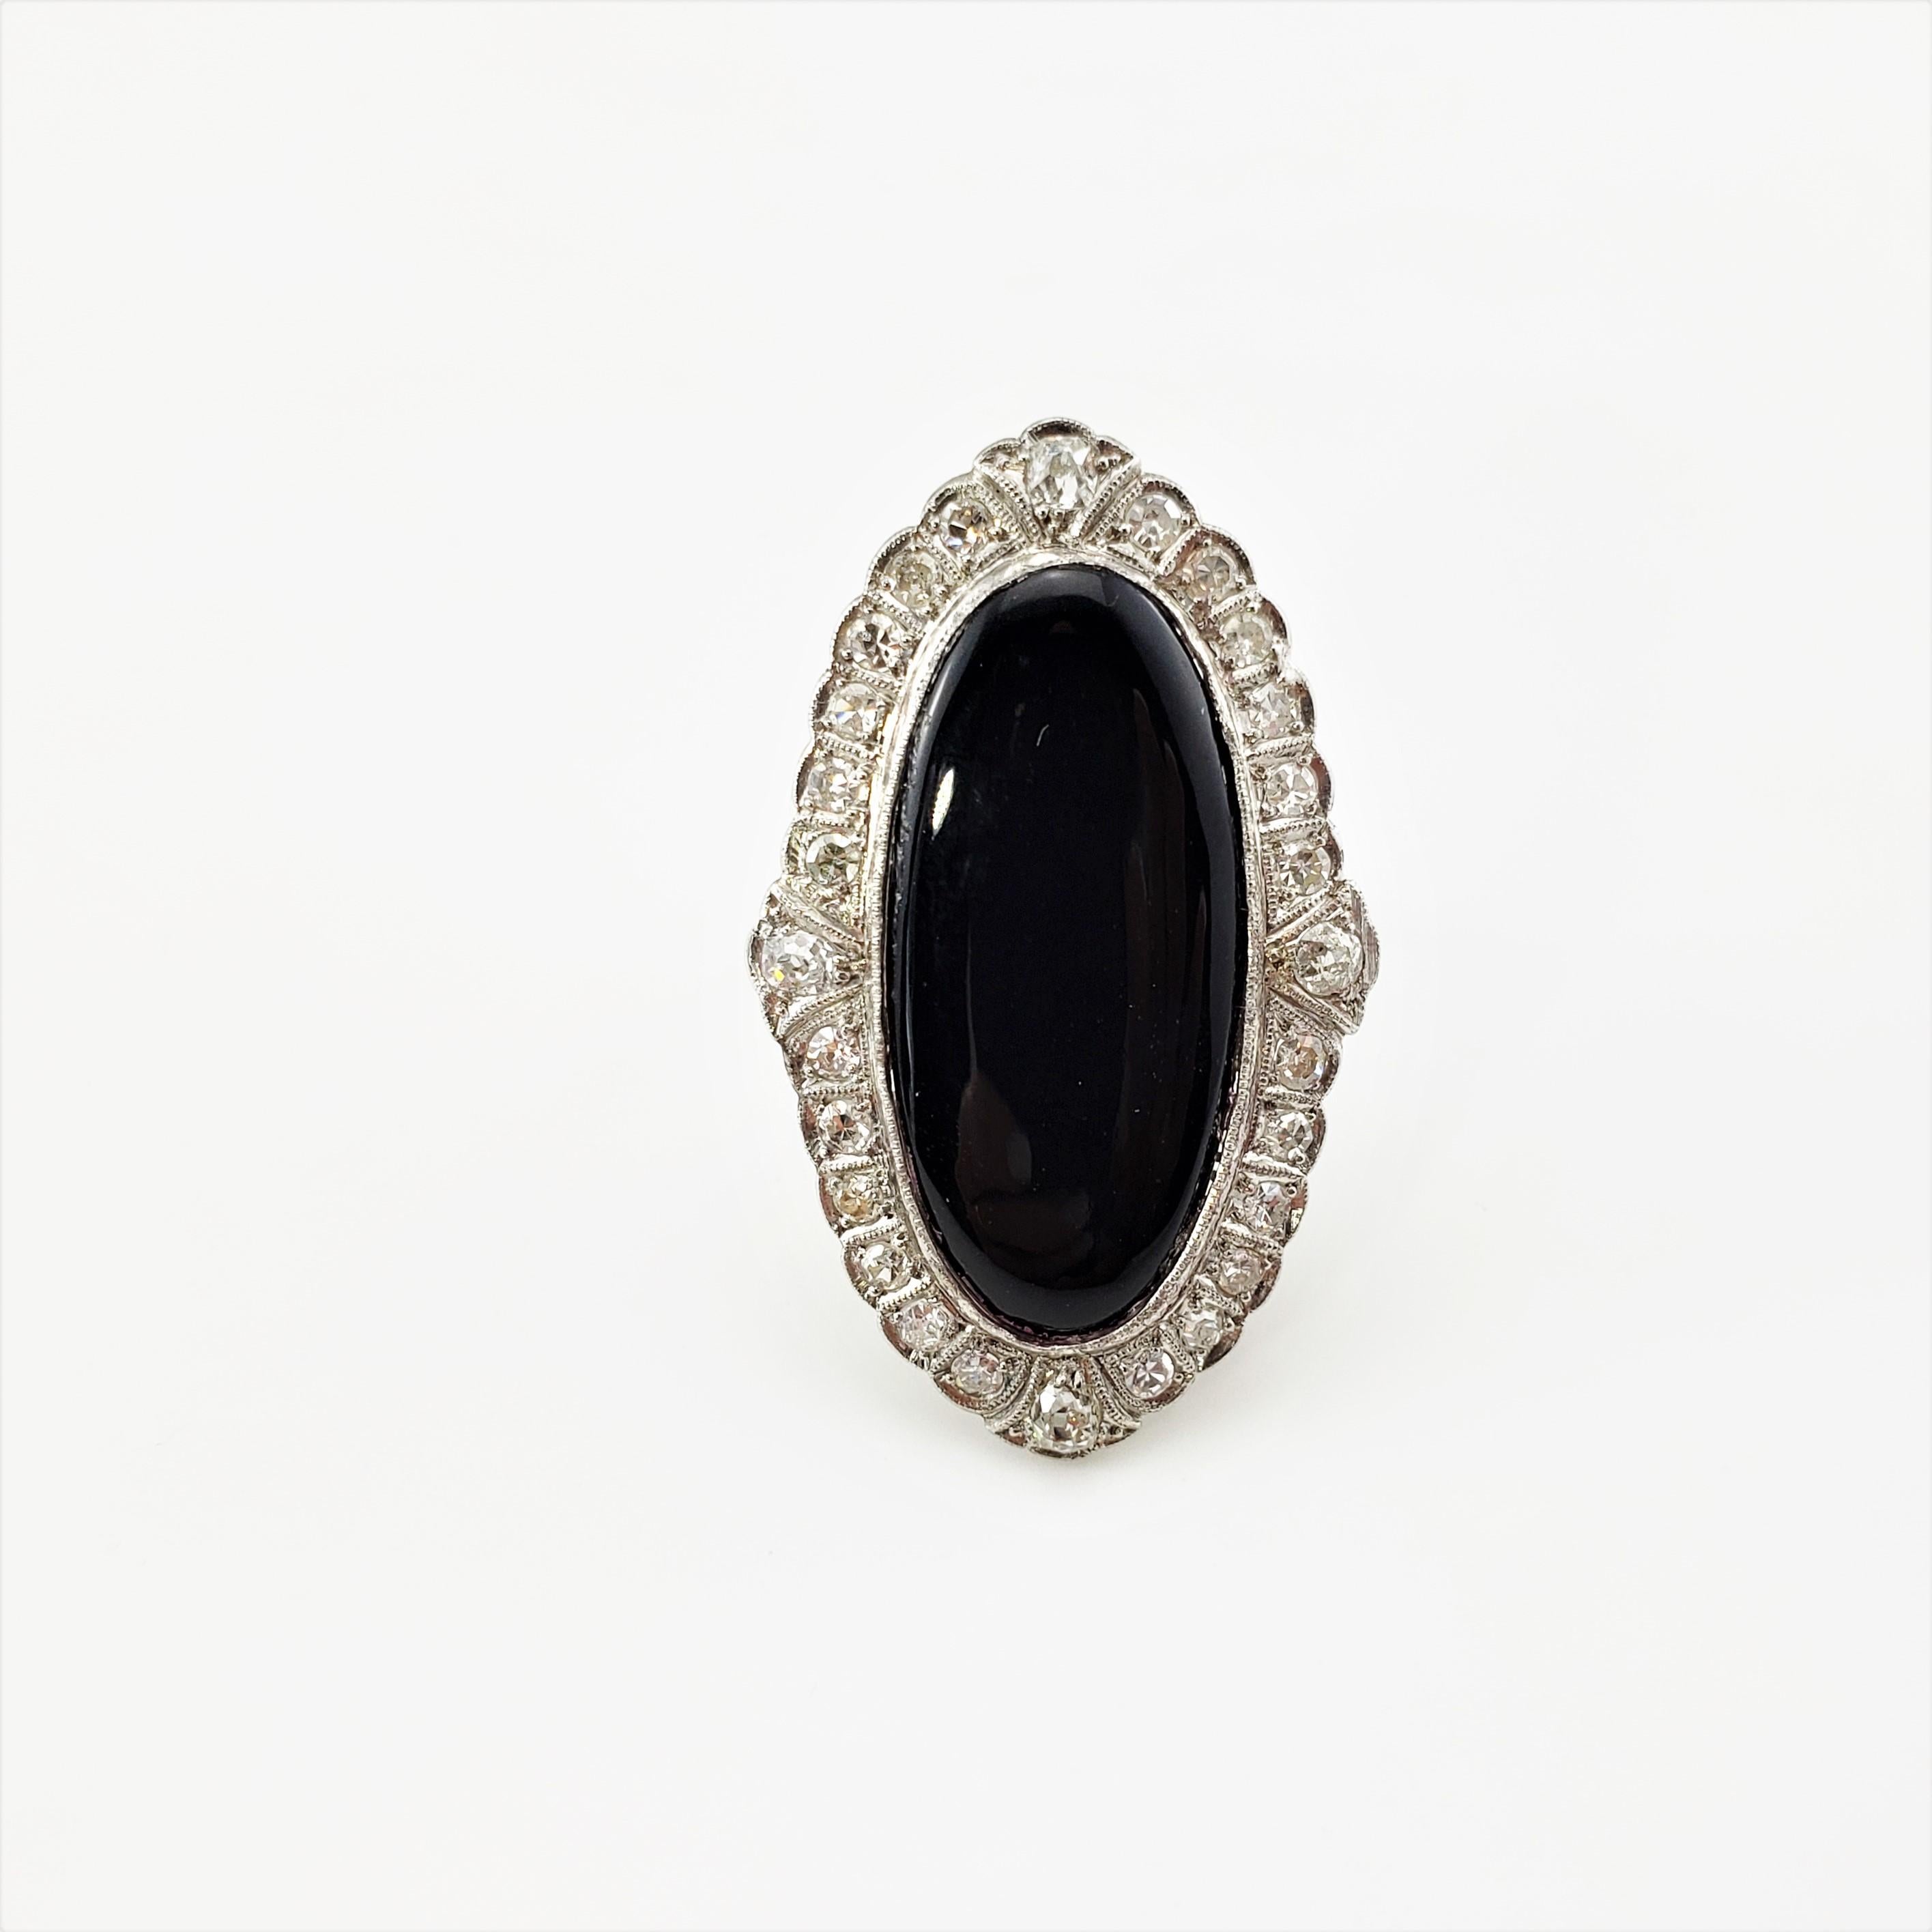 Platinum Onyx and Diamond Ring Size 7-

This stunning ring features one oval onyx stone (28 mm x 14 mm) surrounded 28 round old mine cut diamonds set in classic platinum.  Top of ring measures 38 mm x 23 mm.  Shank measures 1.5 mm.

Approximate